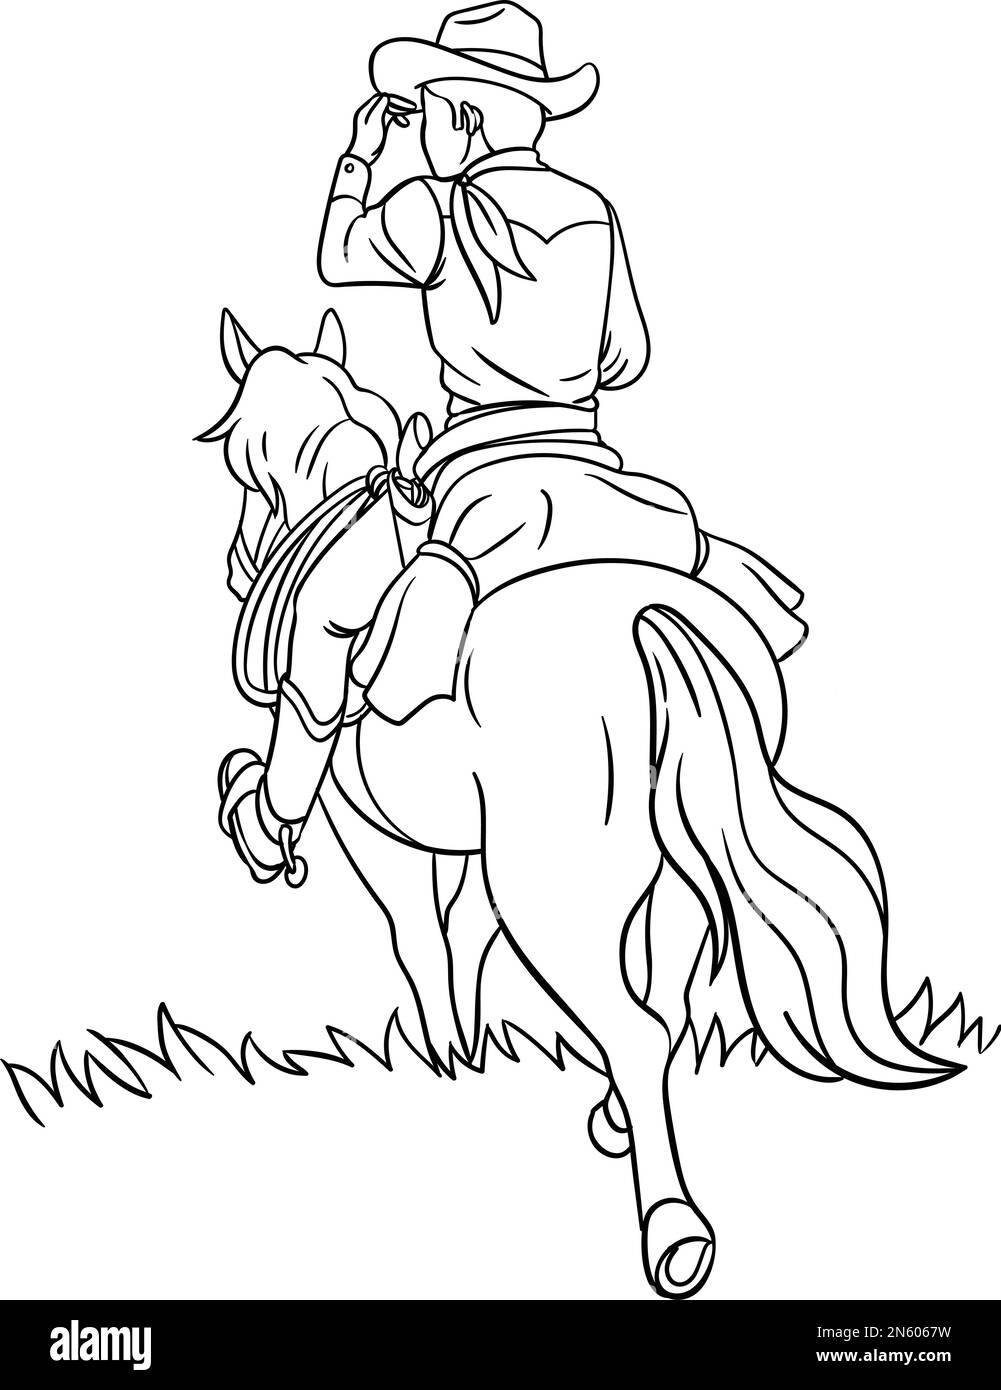 Cowboy horseback riding isolated coloring page stock vector image art